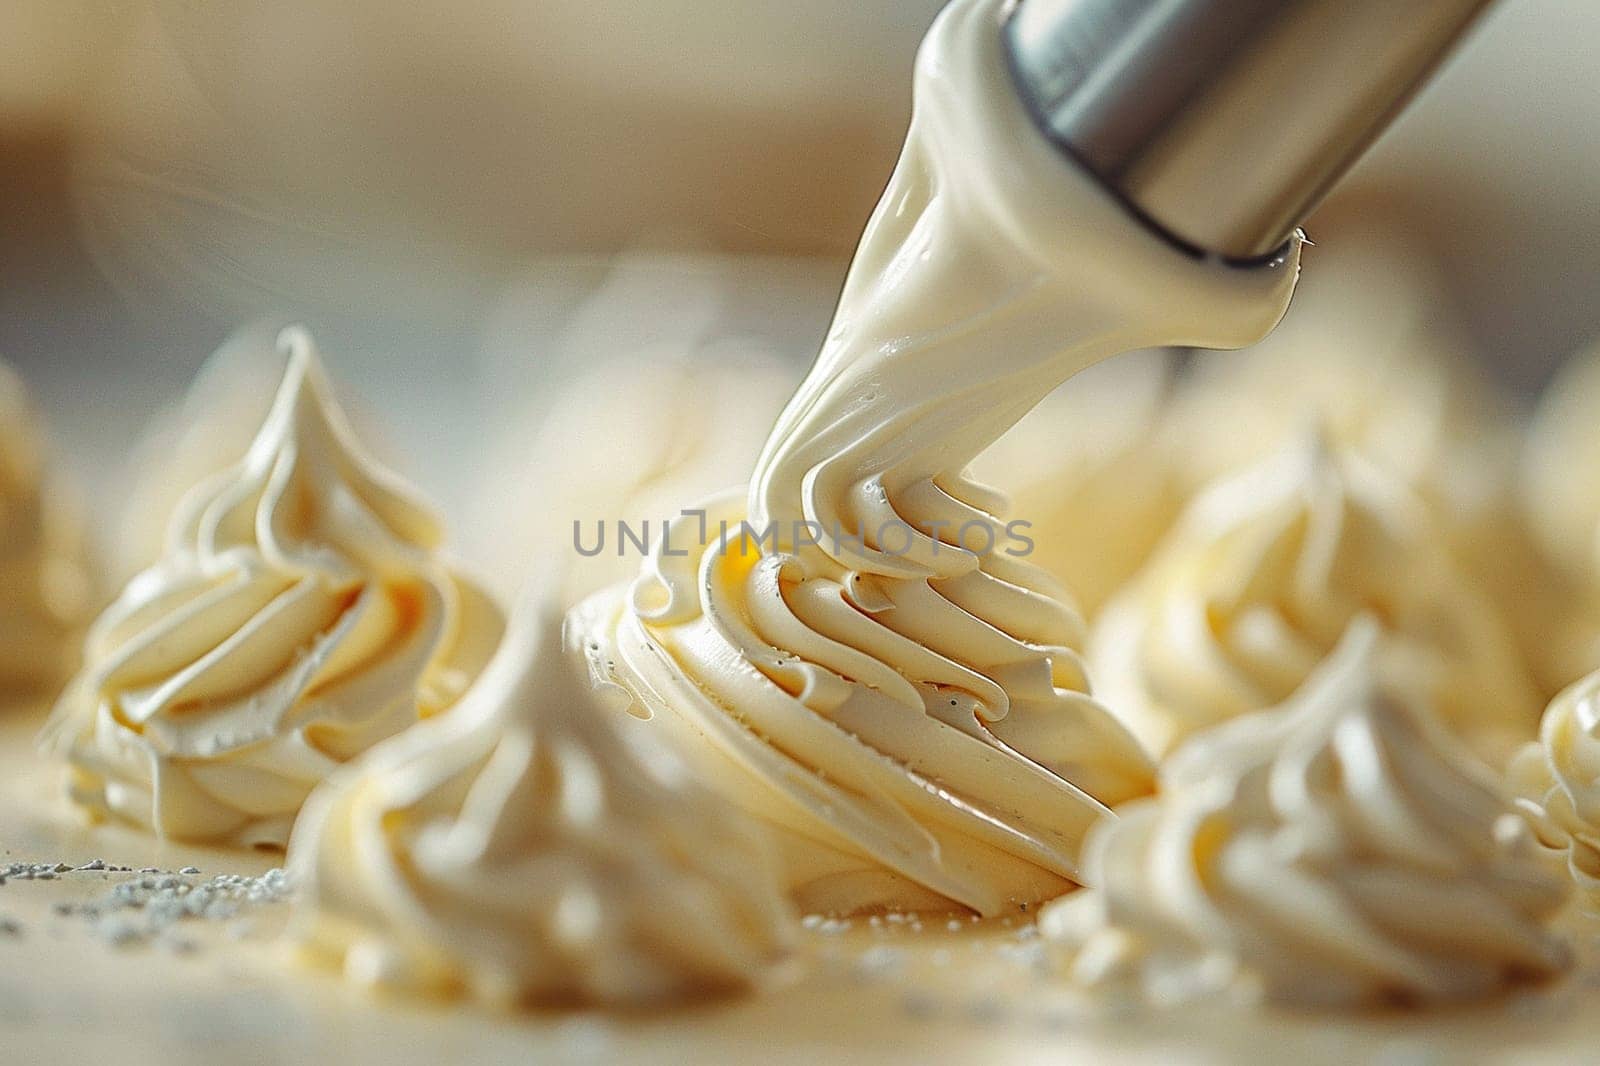 Whipped buttercream in swirl shape. Beautiful decor for a cake using a pastry bag. Generated by artificial intelligence by Vovmar